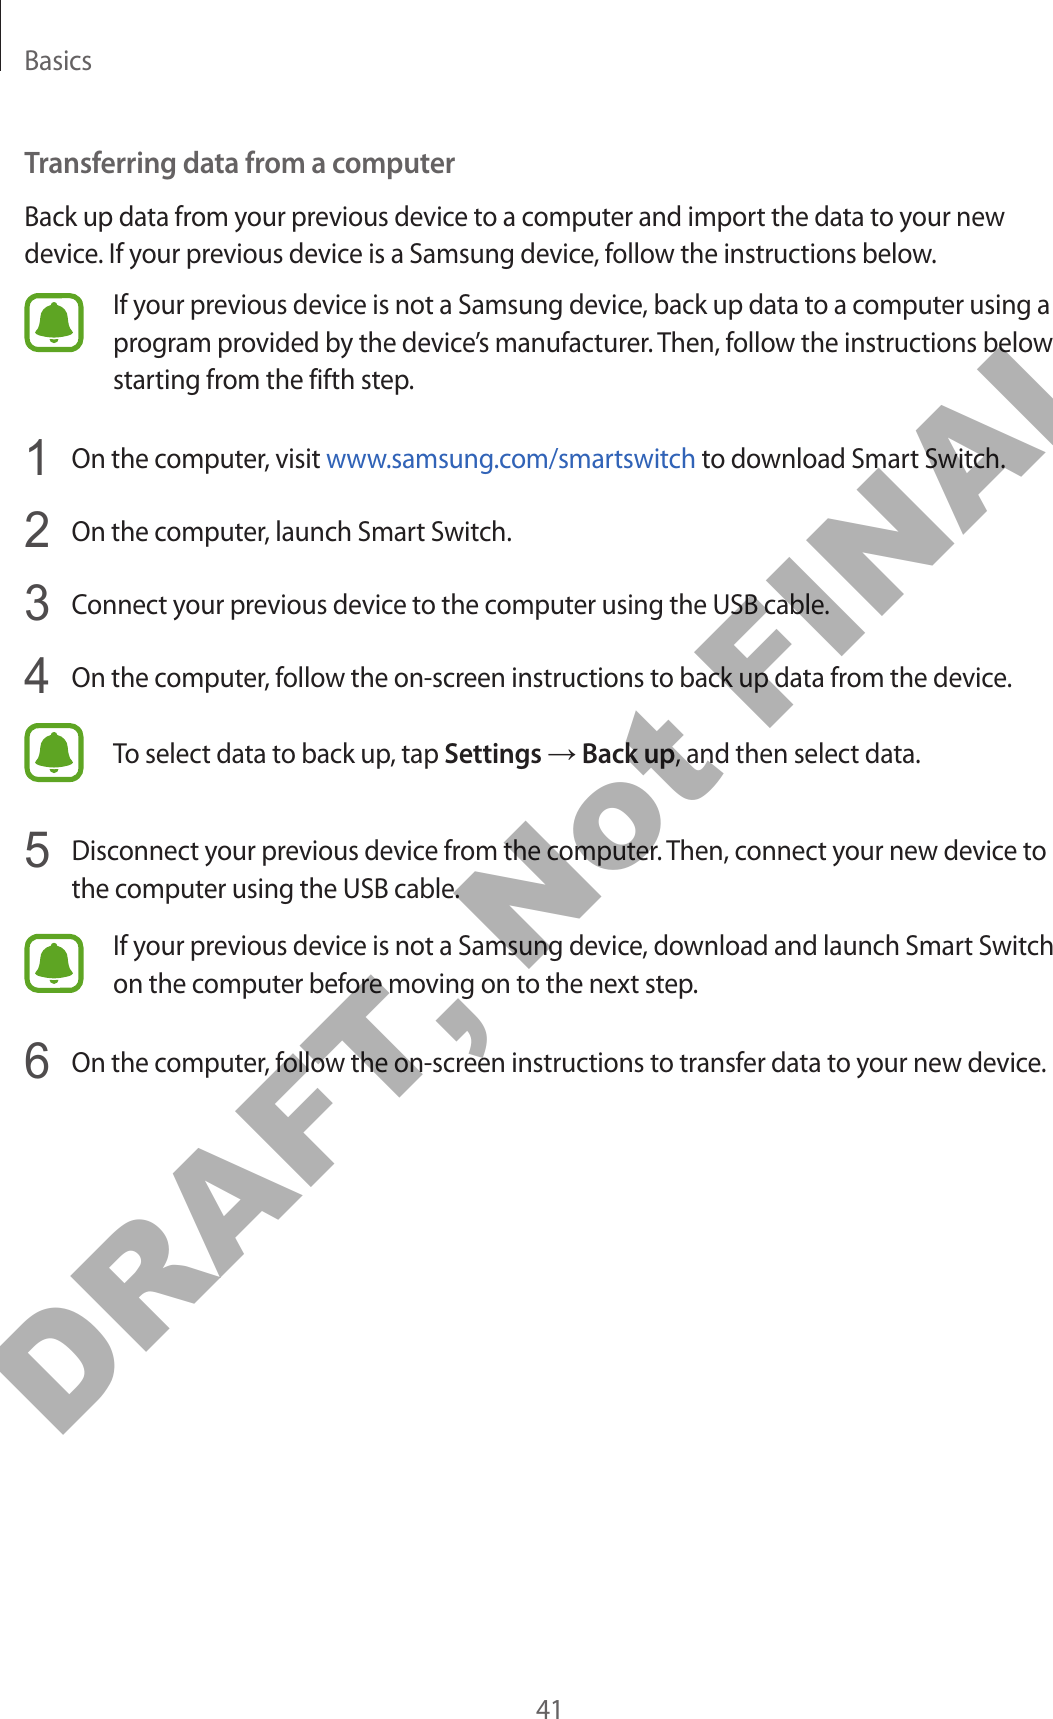 Basics41Transferring data from a computerBack up data from your previous device to a computer and import the data to your new device. If your previous device is a Samsung device, follow the instructions below.If your previous device is not a Samsung device, back up data to a computer using a program provided by the device’s manufacturer. Then, follow the instructions below starting from the fifth step.1  On the computer, visit www.samsung.com/smartswitch to download Smart Switch.2  On the computer, launch Smart Switch.3  Connect your previous device to the computer using the USB cable.4  On the computer, follow the on-screen instructions to back up data from the device.To select data to back up, tap Settings → Back up, and then select data.5  Disconnect your previous device from the computer. Then, connect your new device to the computer using the USB cable.If your previous device is not a Samsung device, download and launch Smart Switch on the computer before moving on to the next step.6  On the computer, follow the on-screen instructions to transfer data to your new device.DRAFT, Not FINAL